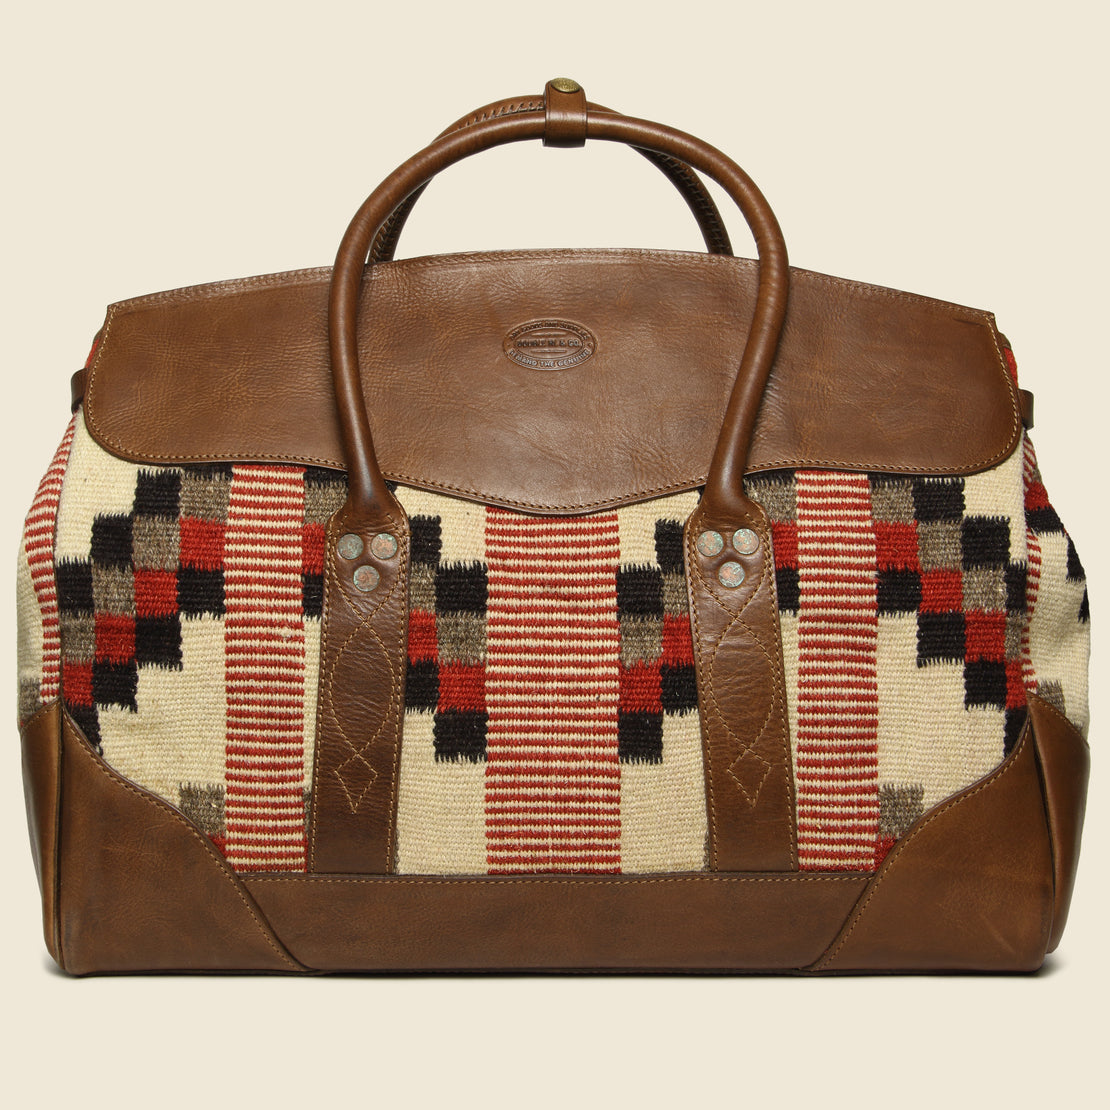 Pecos Blanket Duffle Bag - Cream  Multi/Brown - RRL - STAG Provisions - Accessories - Bags / Luggage